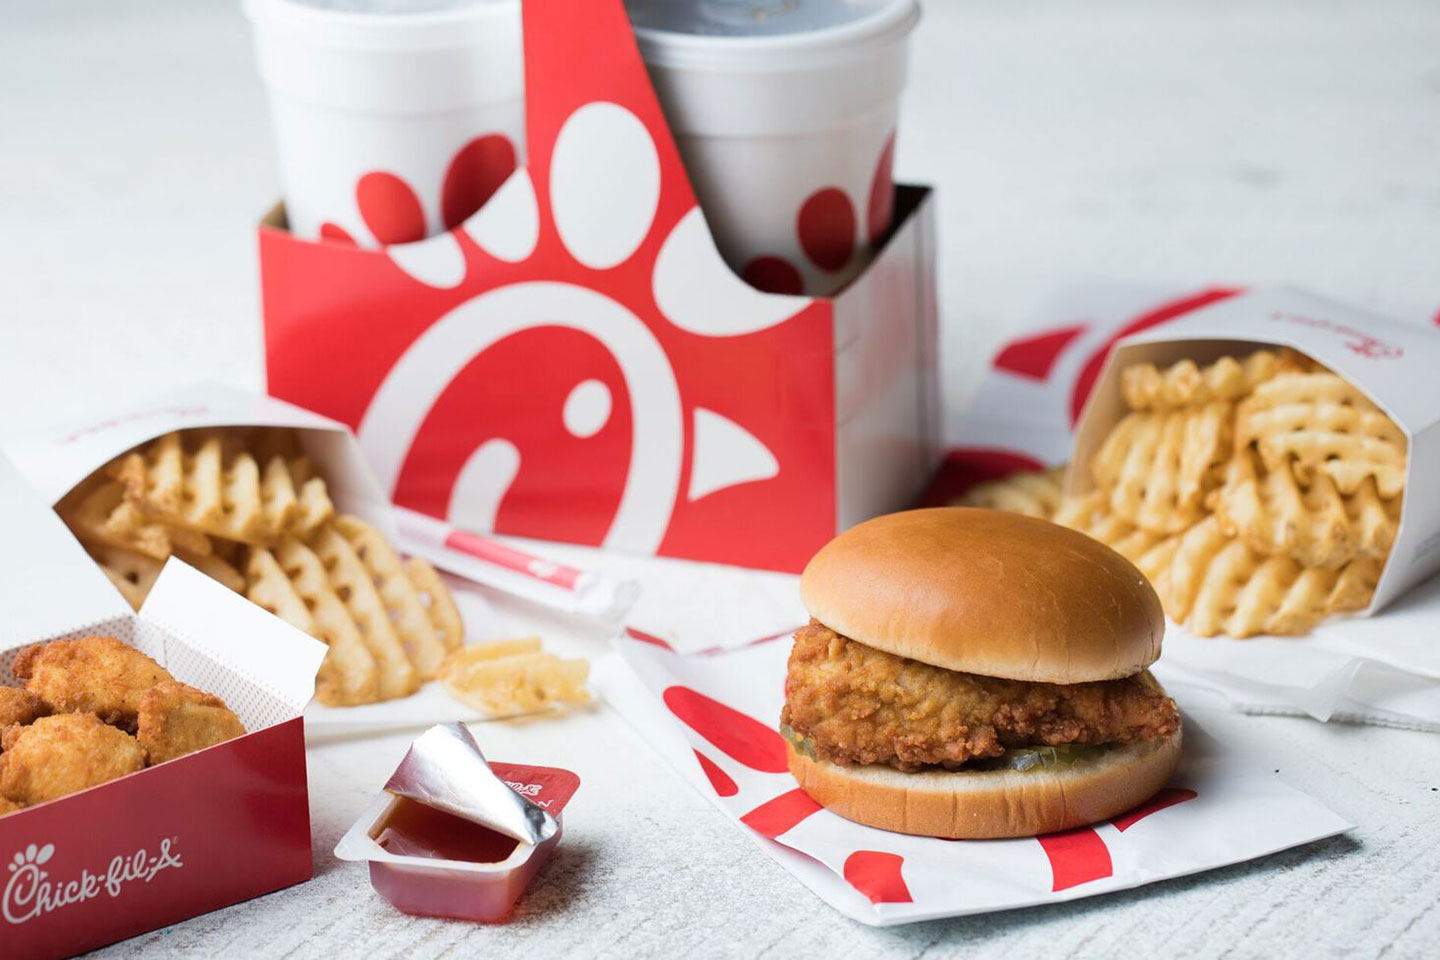 Do Not Leave Your Friends in Battle: Chick-Fil-A and the Culture Wars